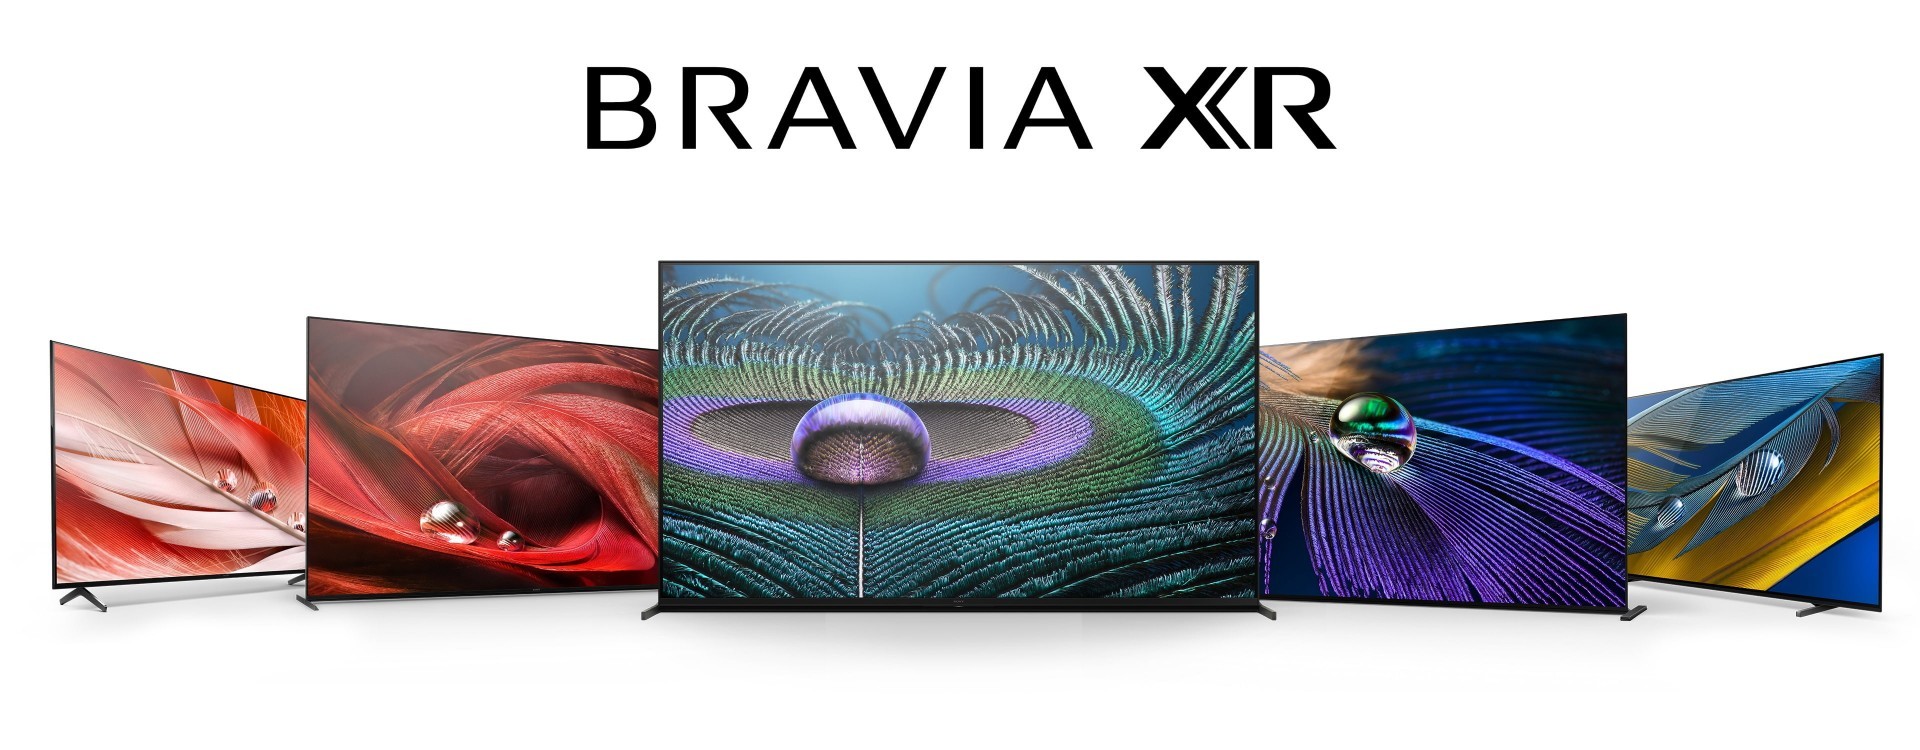 Sony 发表“Perfect for PS5”BRAVIA XR 系列电视 搭载独家 PS5 对应功能